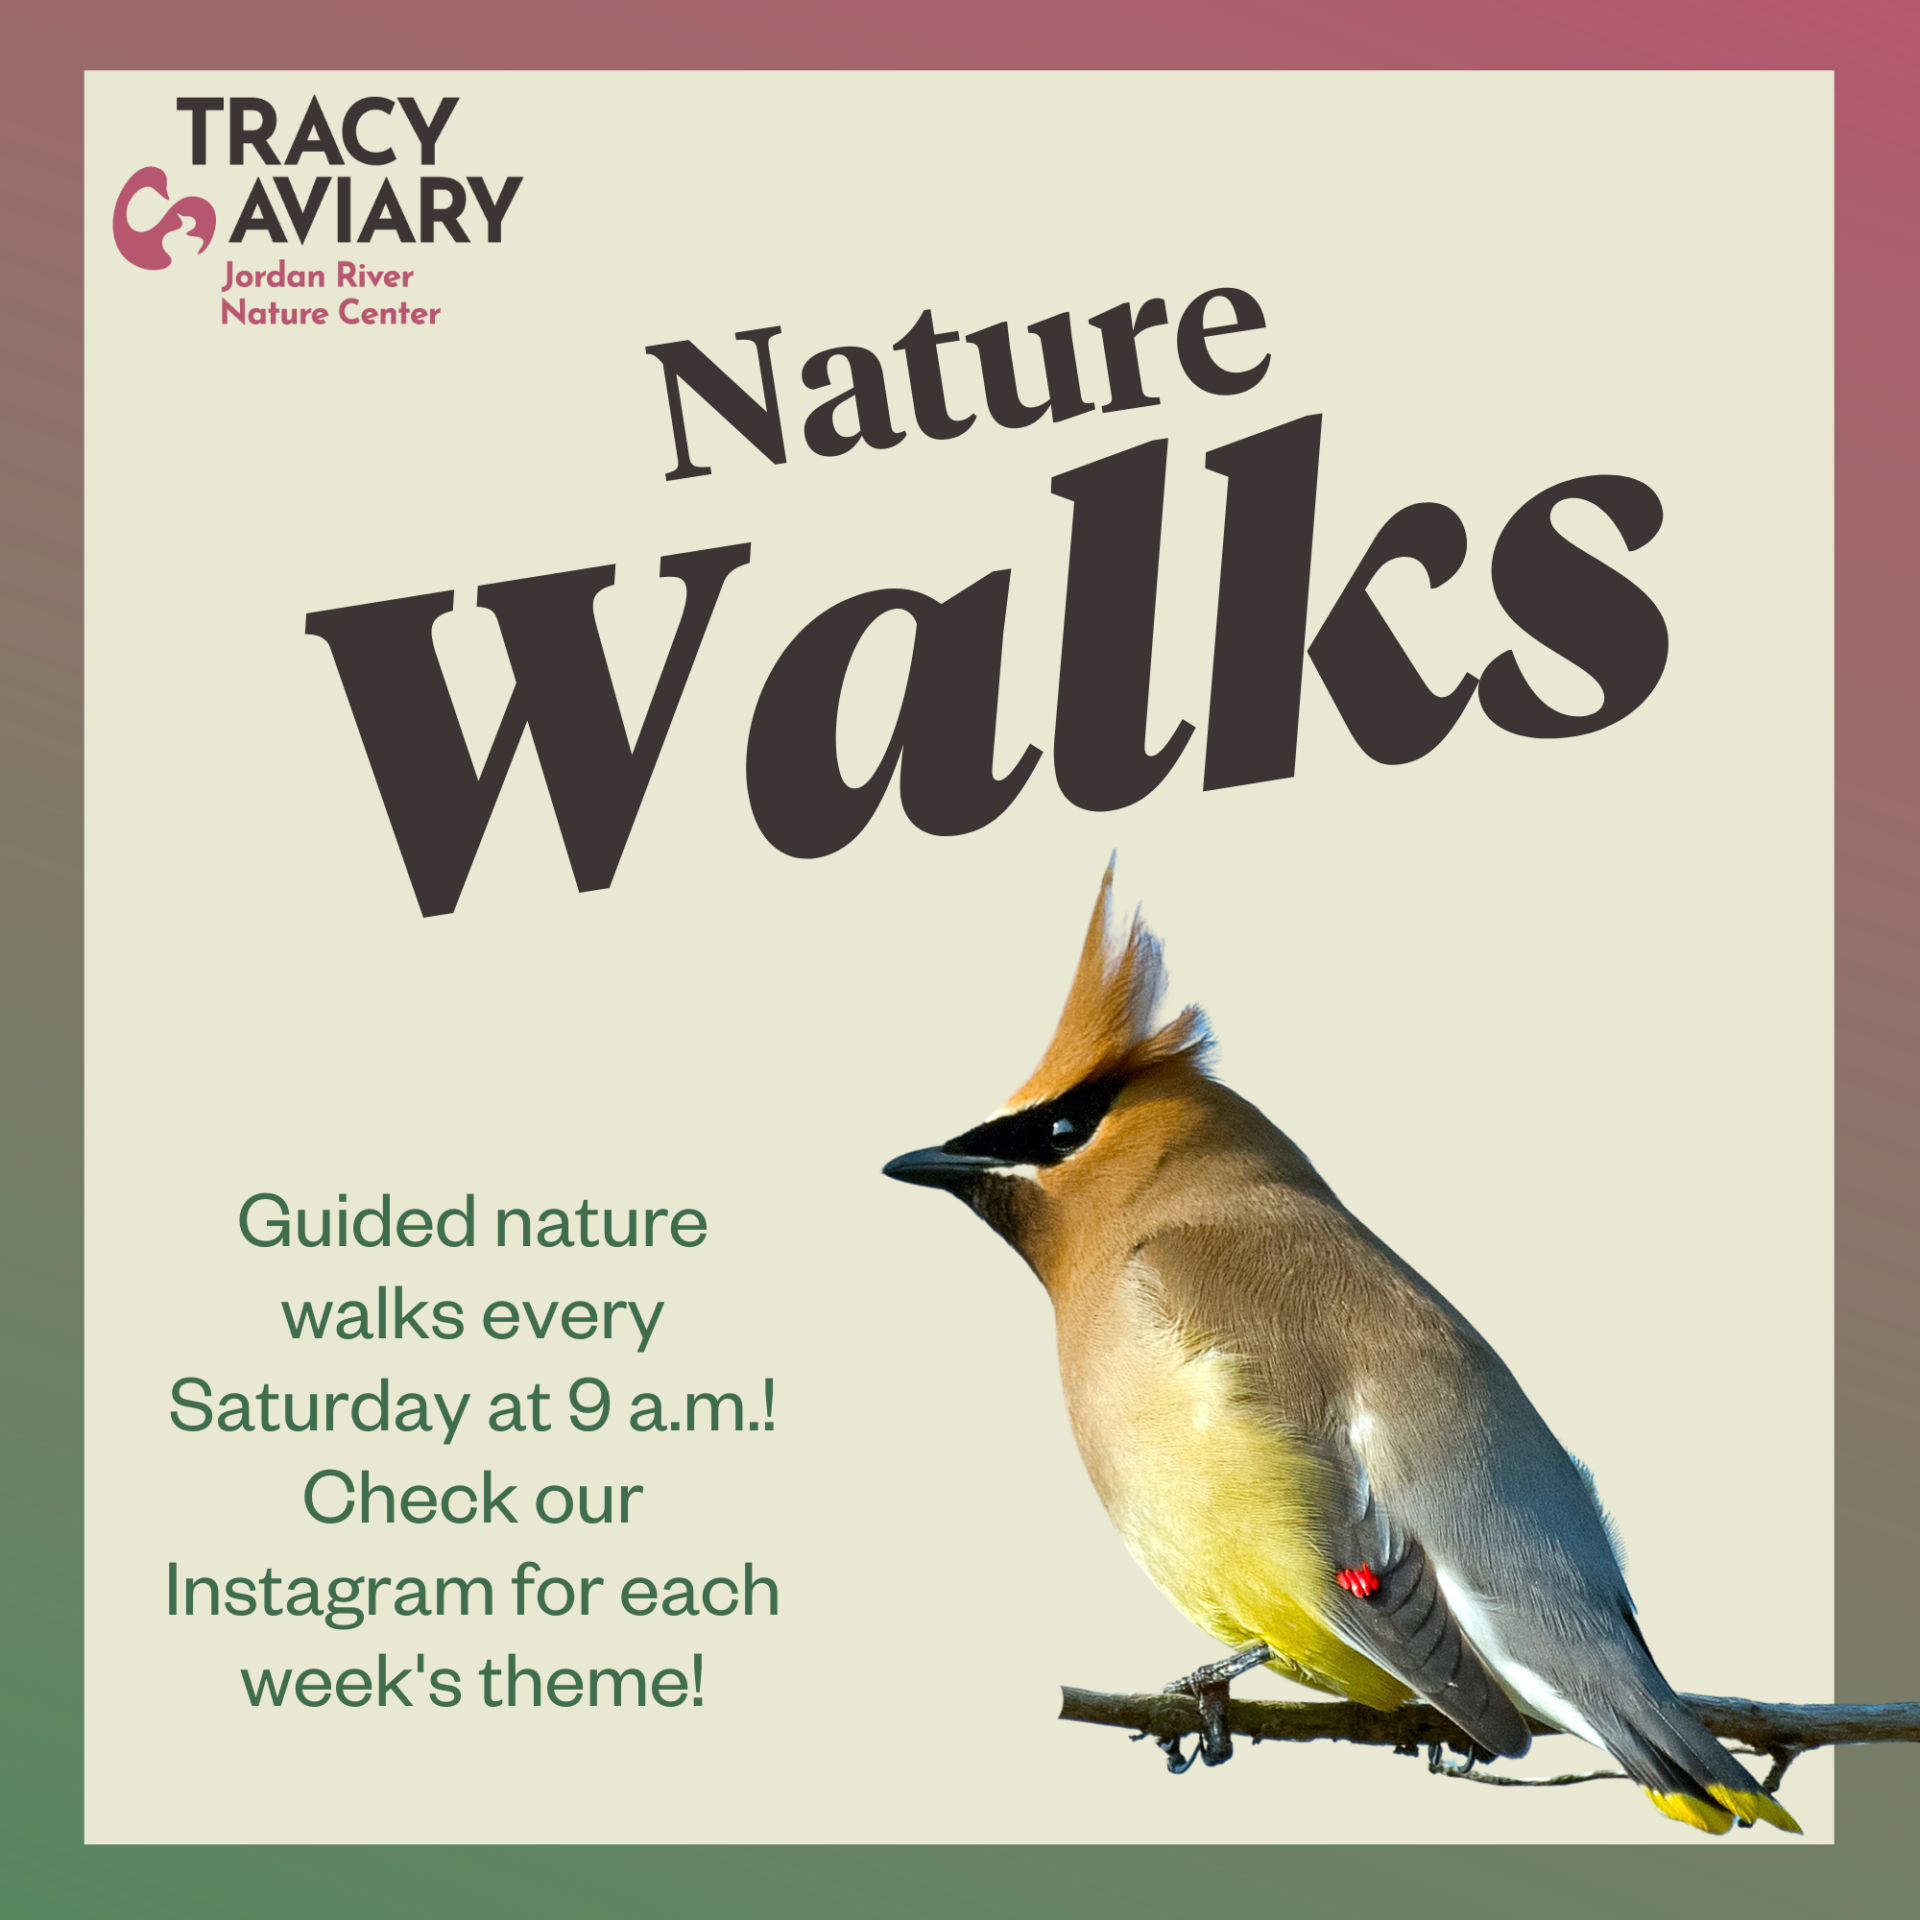 Events at Jordan River Nature Center's Tracy Aviary